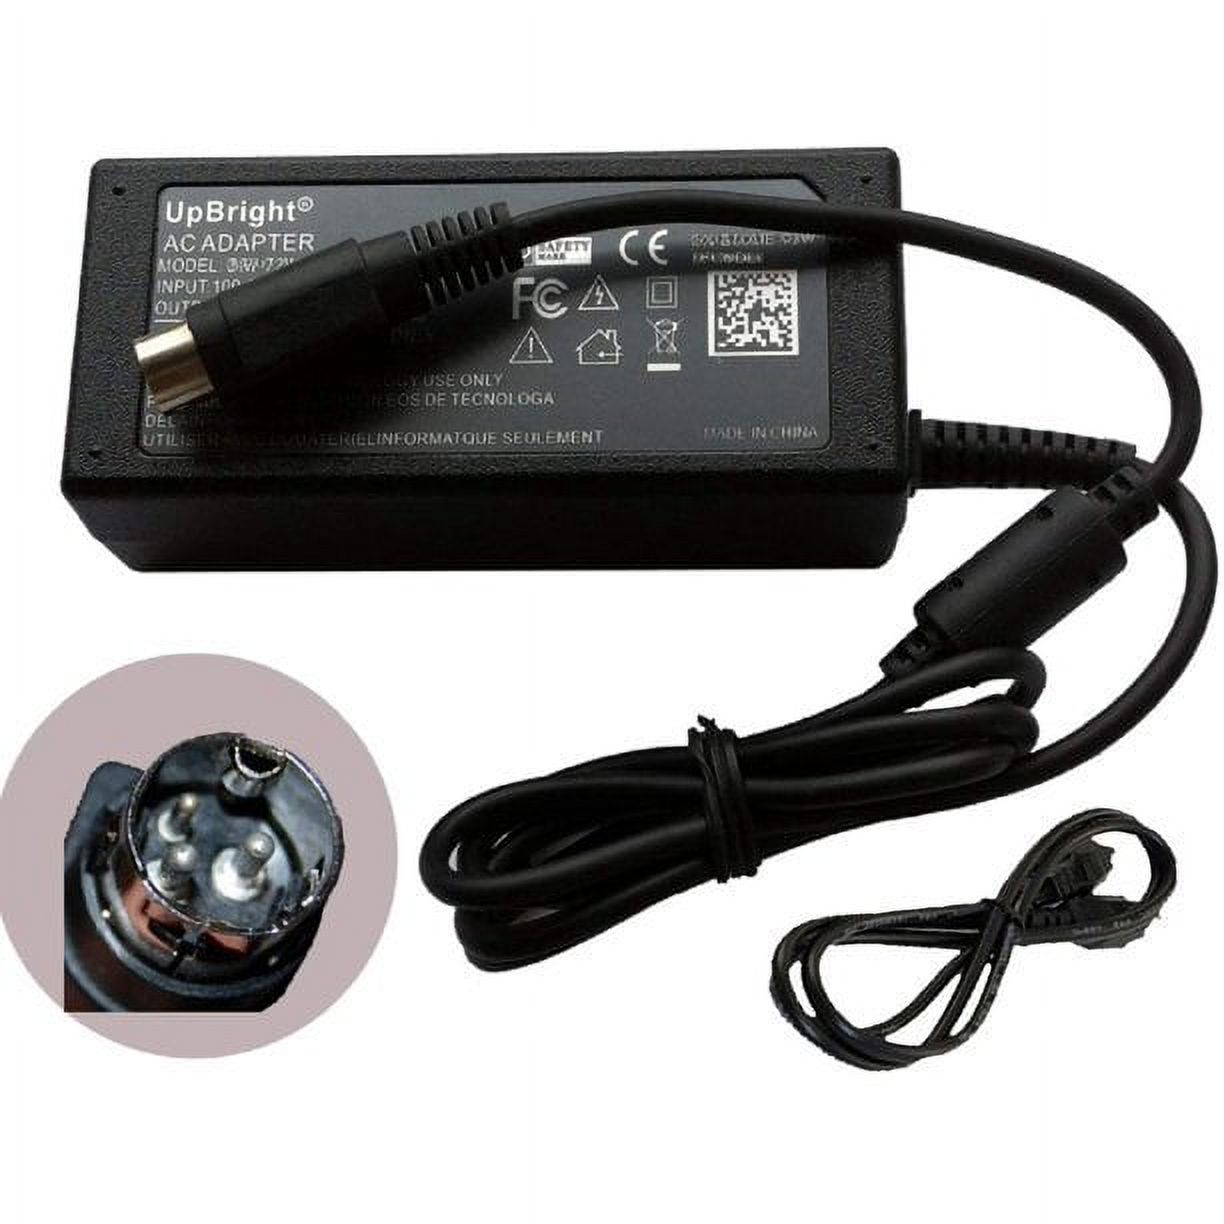 UpBright 3-Pin 12V AC/DC Adapter Compatible with Skyworth SLC-1921A SLC-1921A-3S SLC-1519A-3M SLC-1519A-3S SLC-1369A-3C SLC-1369A-3S SLC-1369A-3 SLC1369A3 SLC-1569A SLC-1569A-3 LED HD TV 533Z0905063PI - image 1 of 5